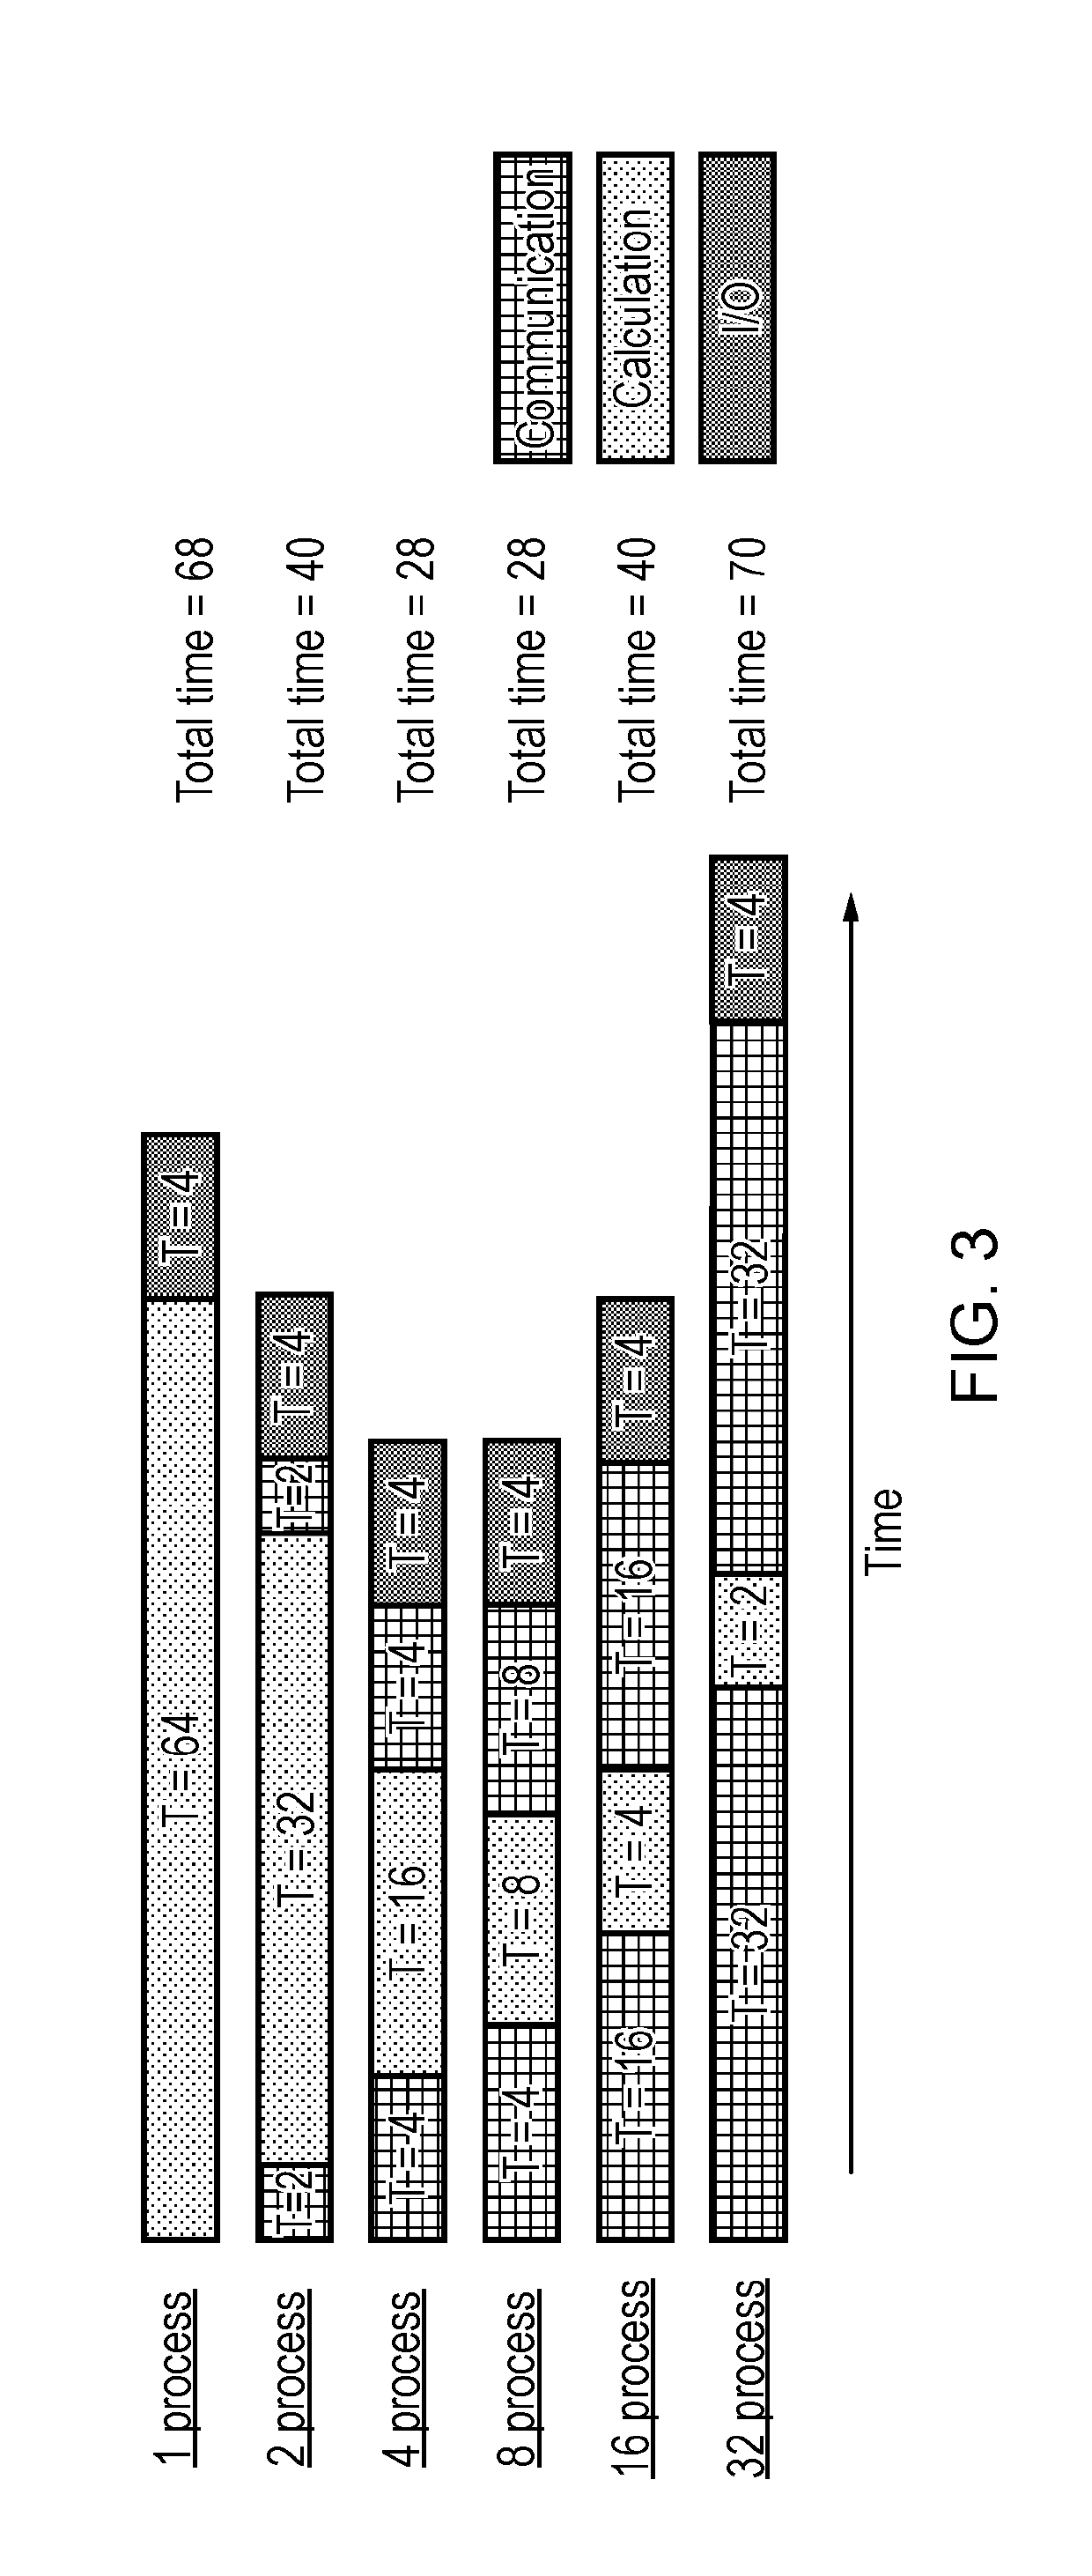 System, controller, method, and program for executing simulation jobs